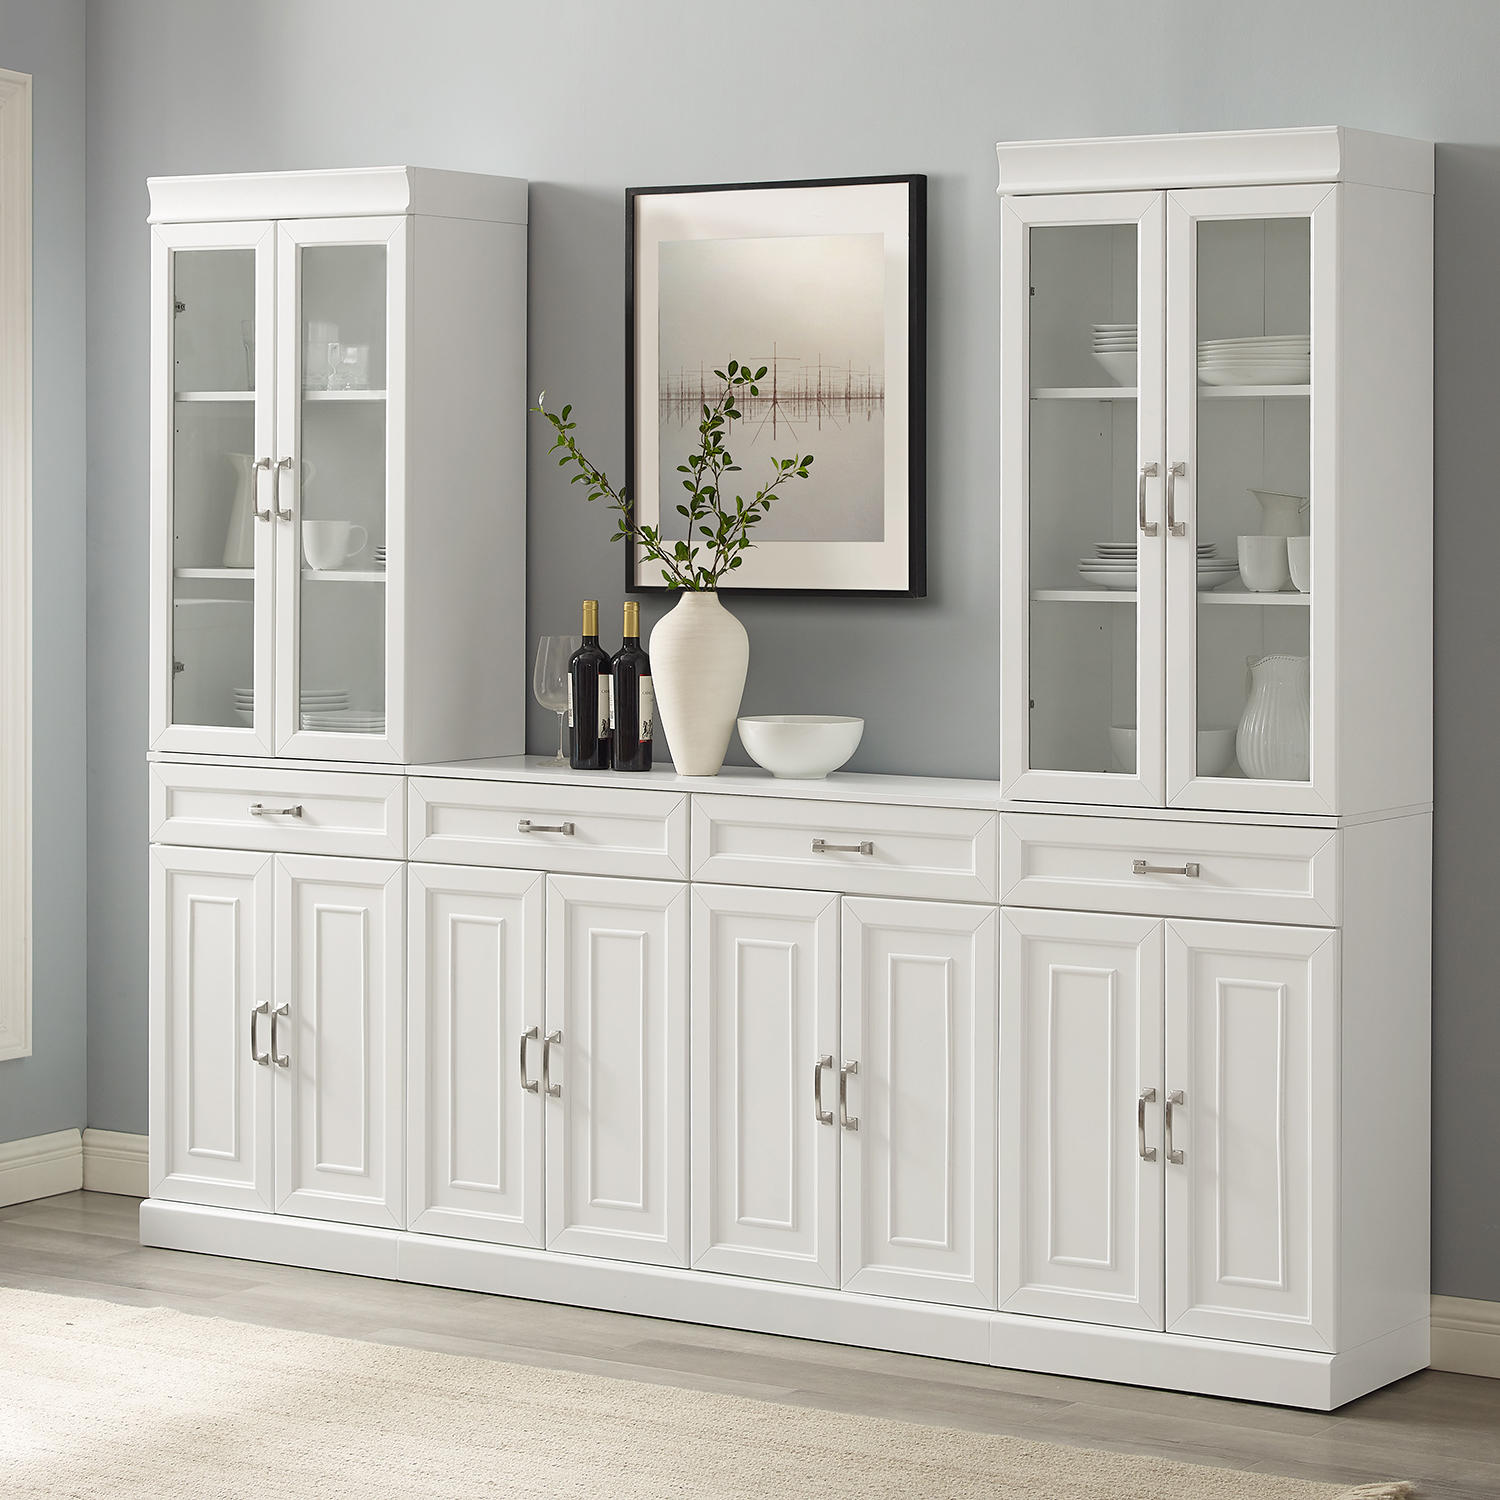 Crosley Furniture Stanton 3-Piece Sideboard And Glass Door Pantry Set, White